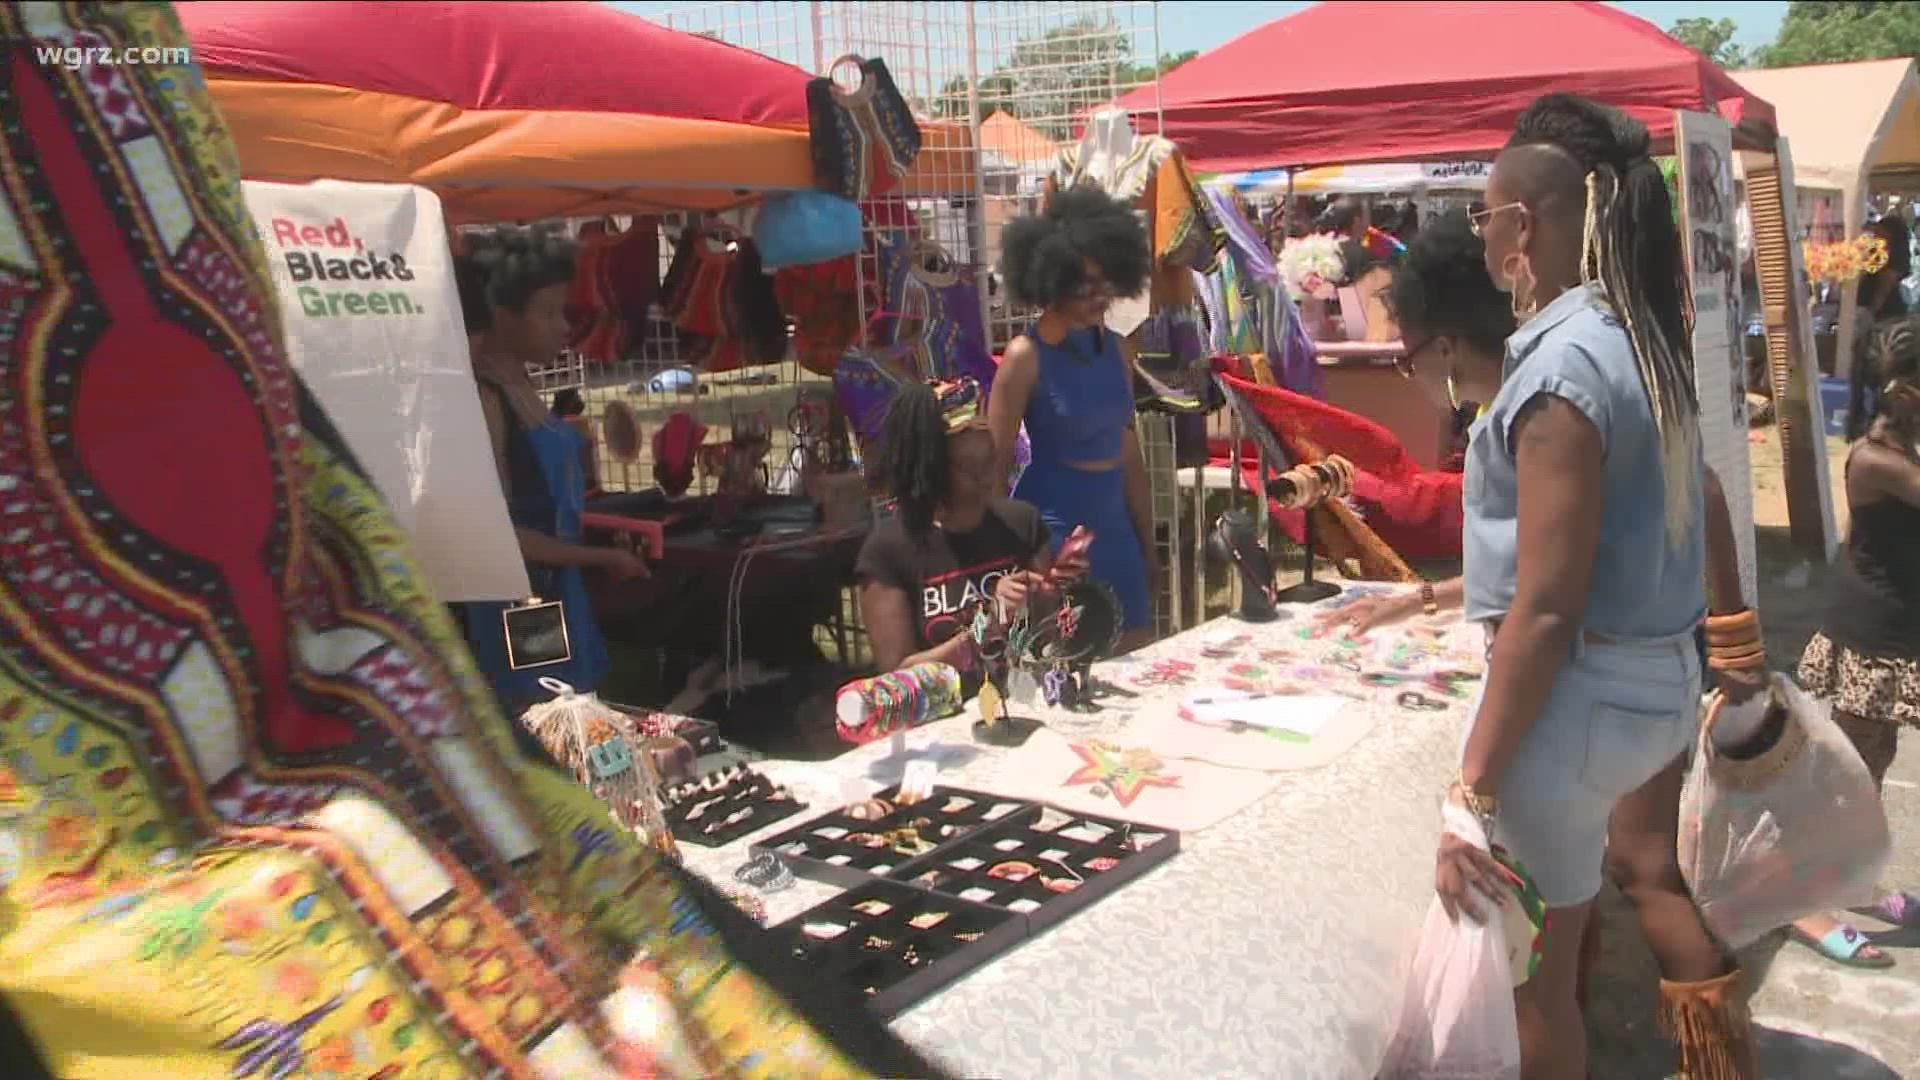 In two weeks the annual Juneteenth festival kicks off at MLK park. The celebration of this years festival will be dedicated to the victims of the mass shooting.